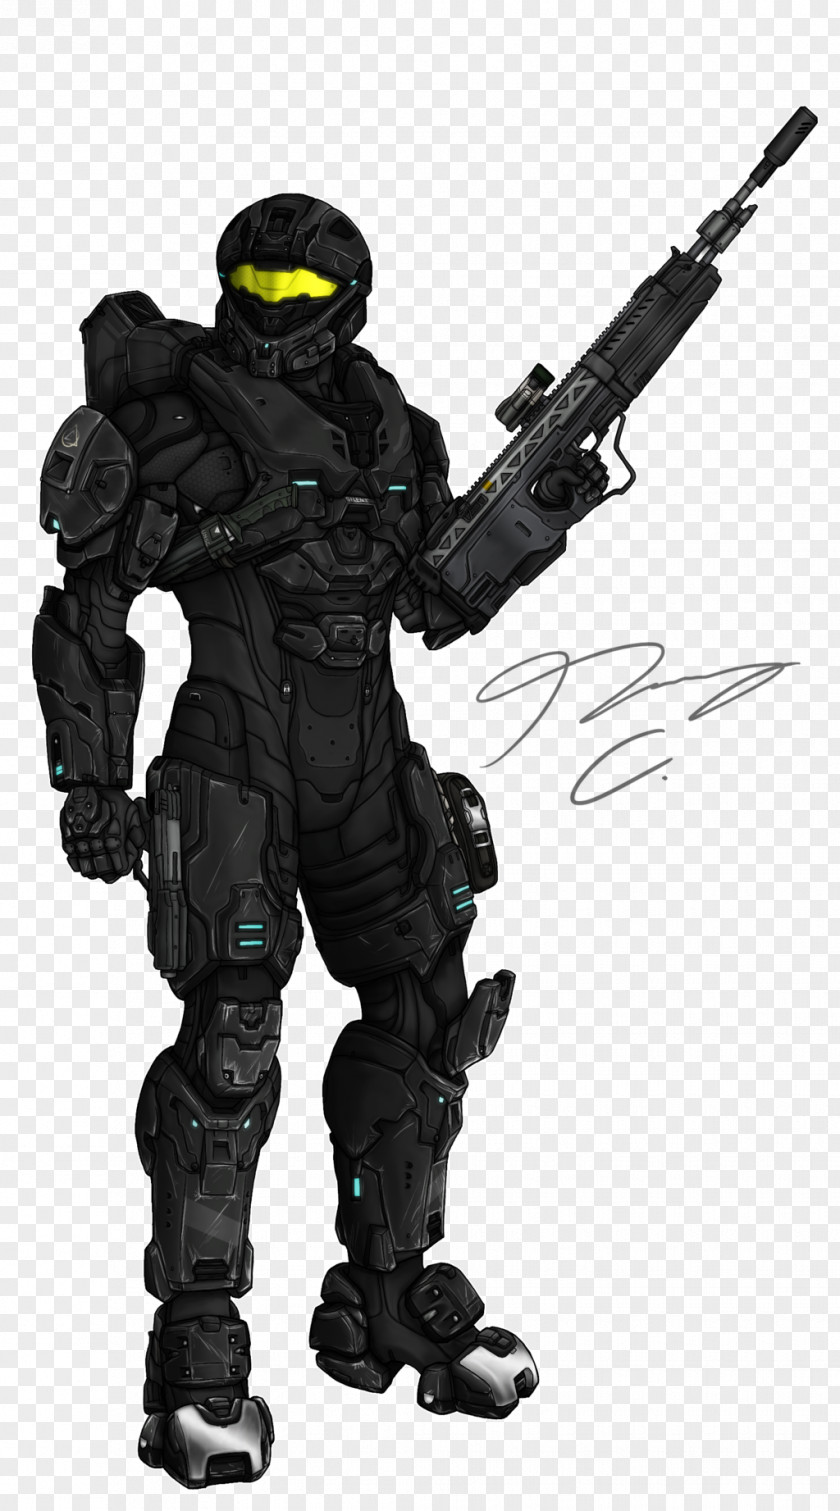 Guuver Master Chief Halo: Reach Halo 4 Spartan Armour PNG